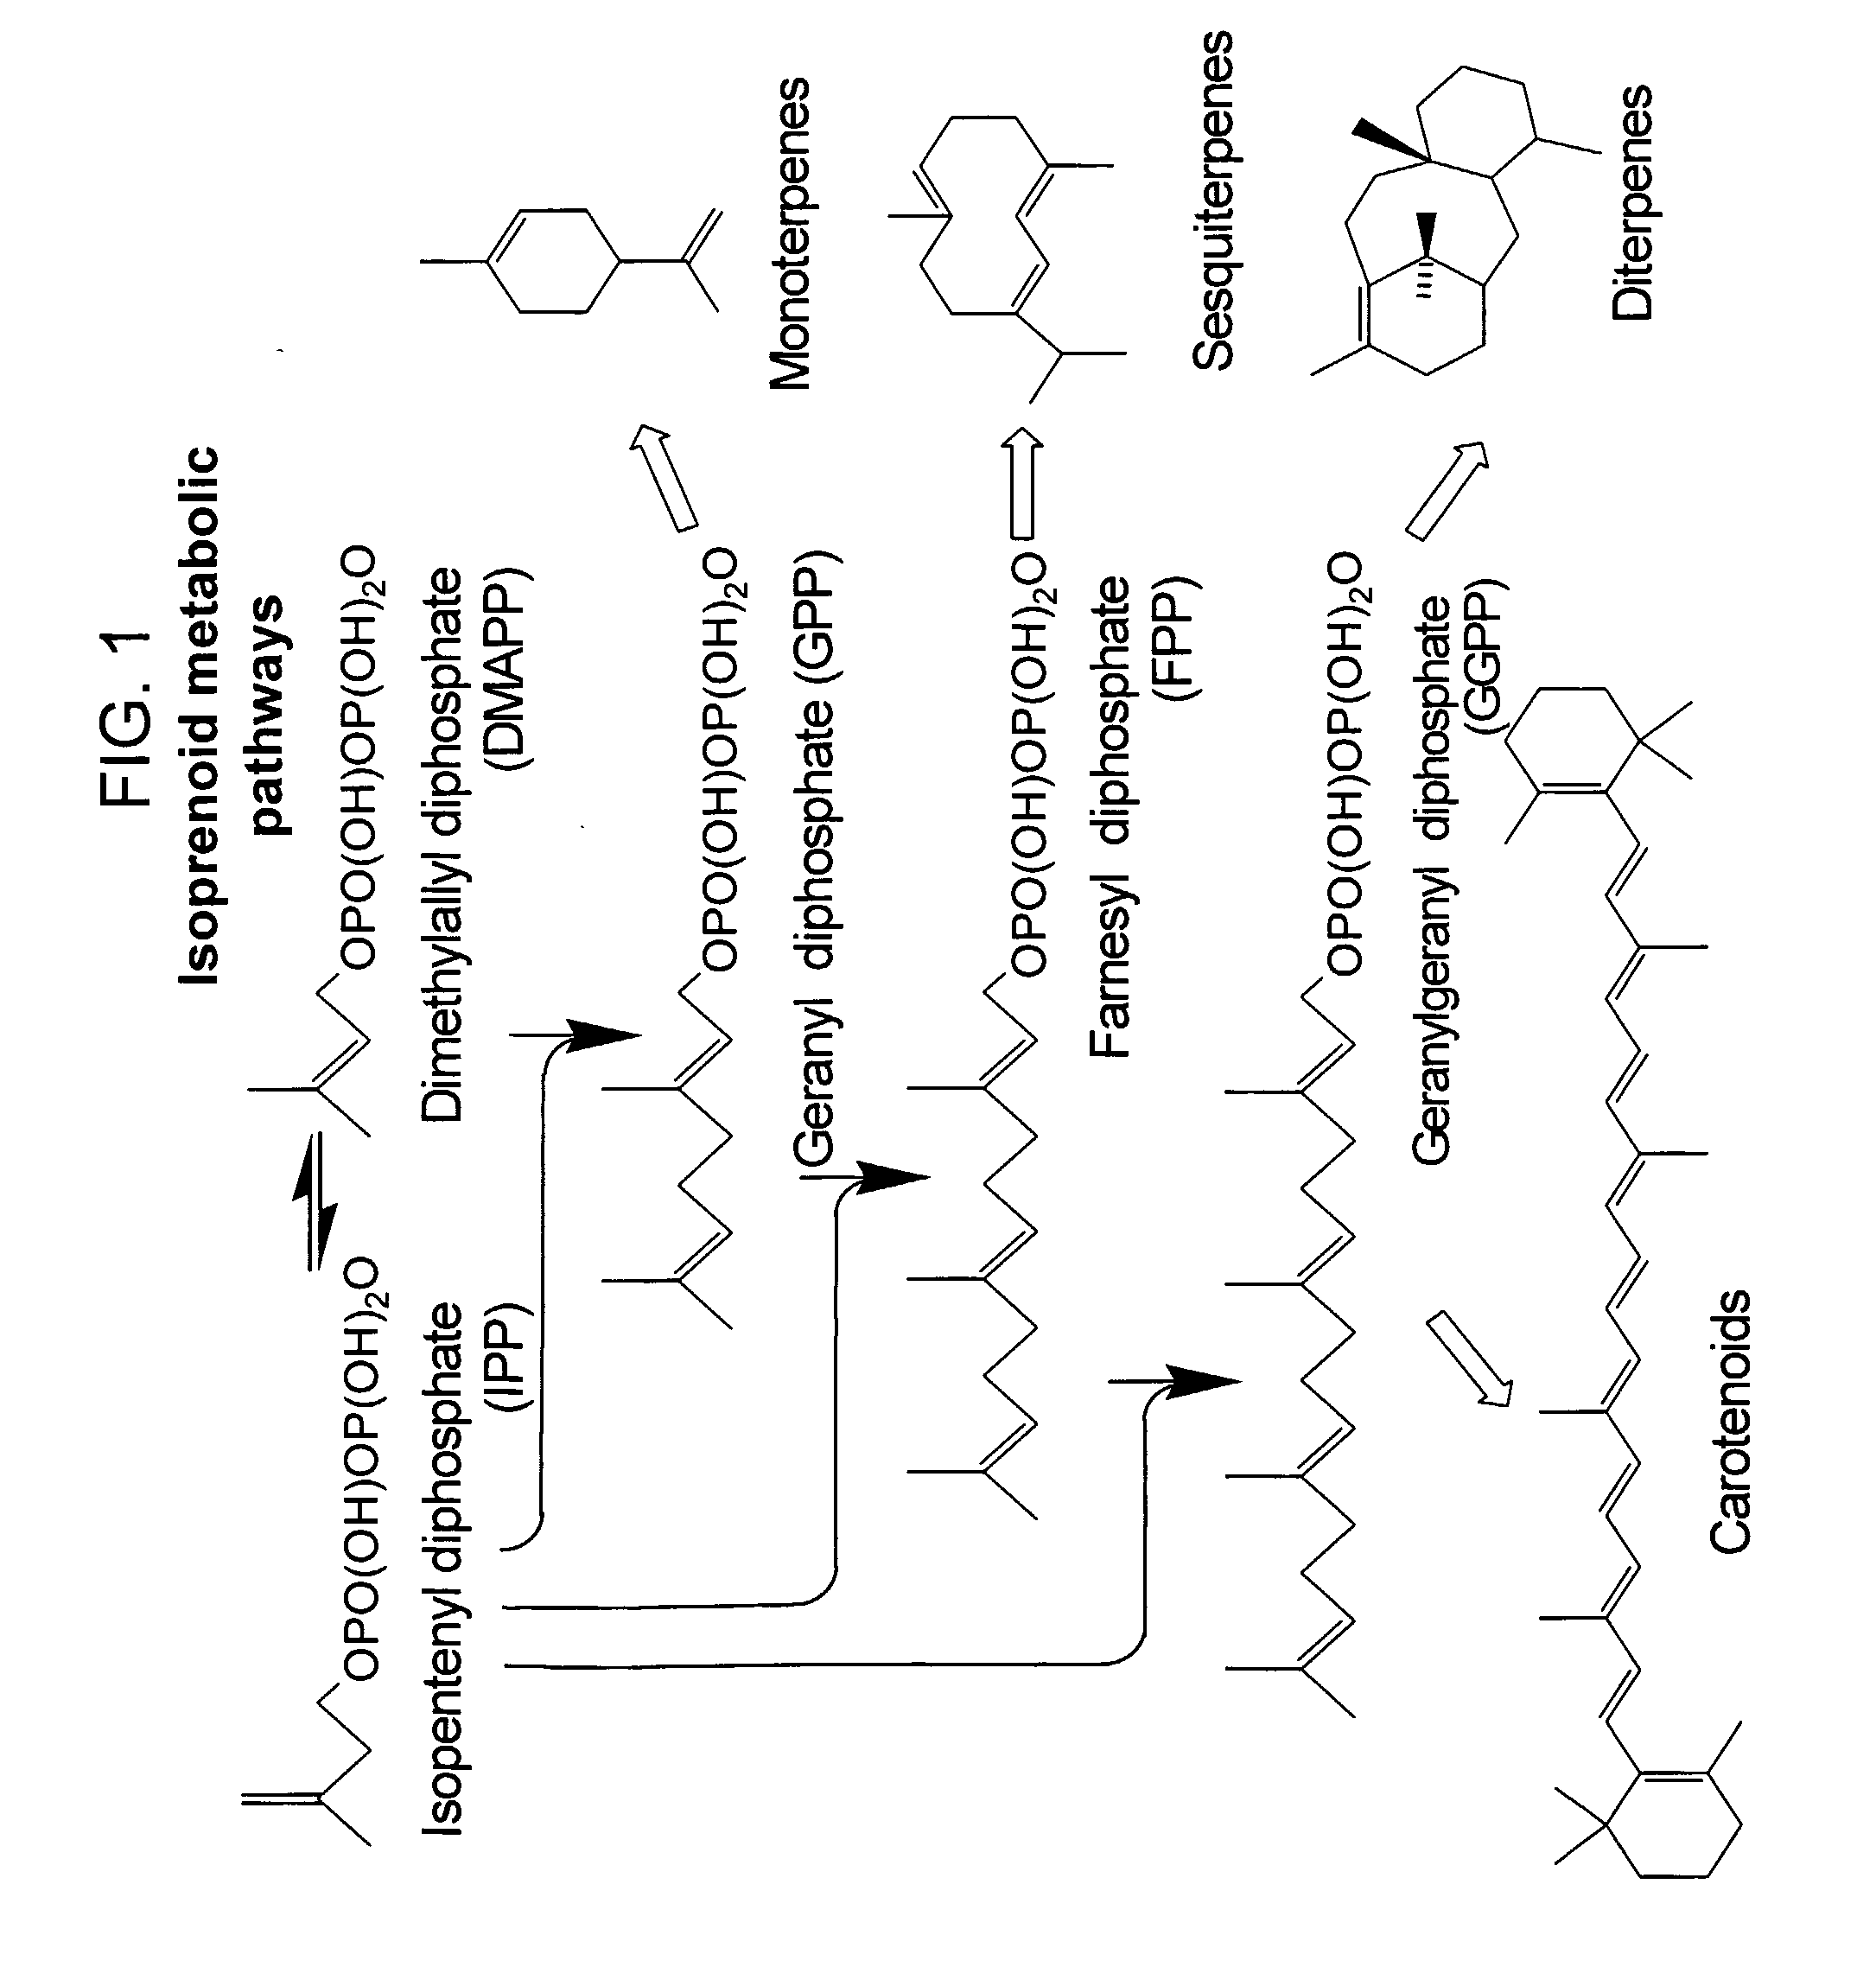 Method for Identification of Enzymes